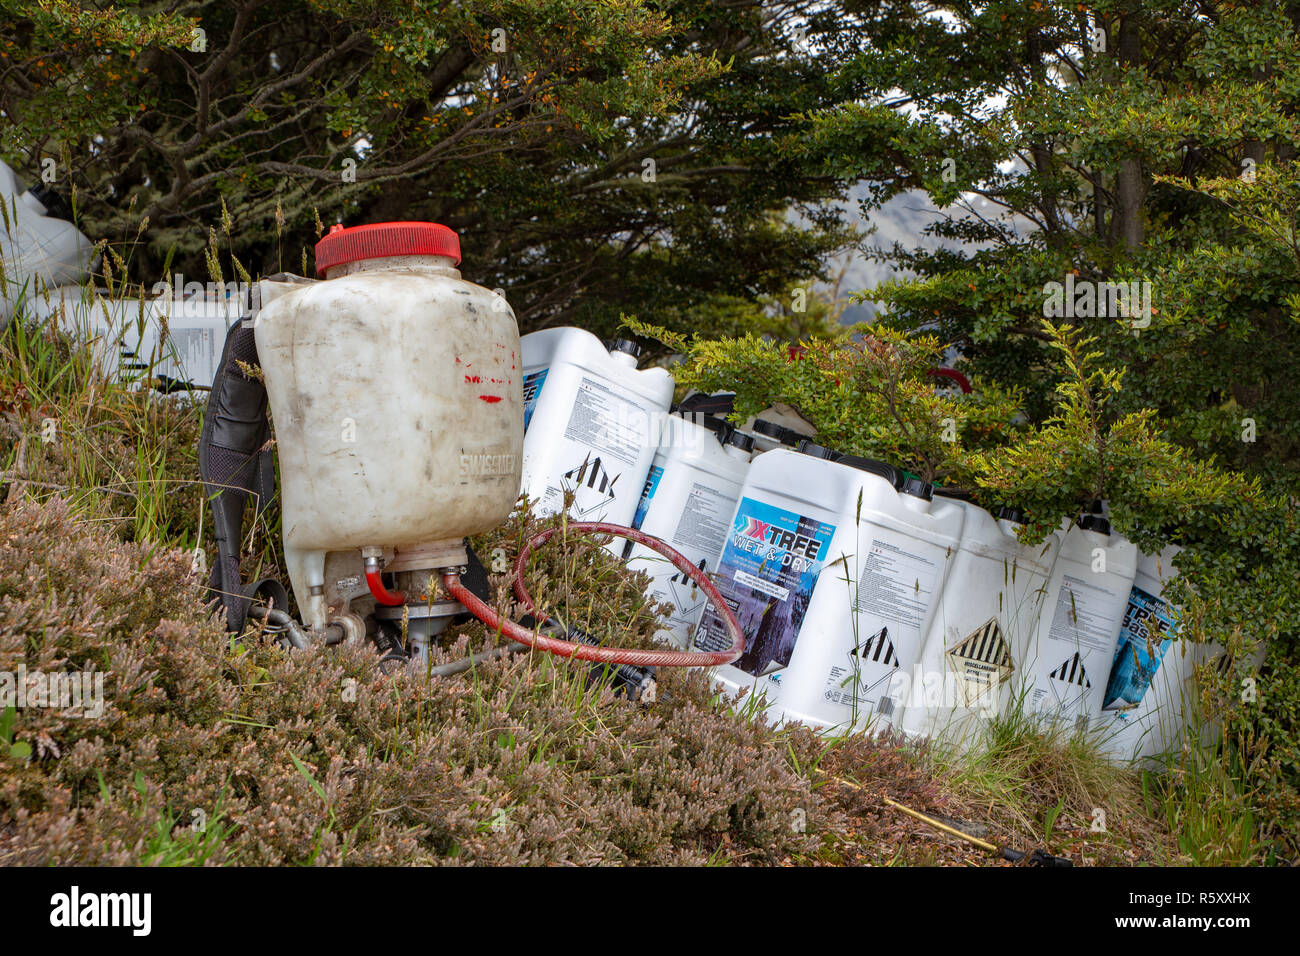 Canterbury, New Zealand - December 3 2018: Plastic containers of herbicide used to kill wilding pines are delivered by helicopter to the top of a hill Stock Photo